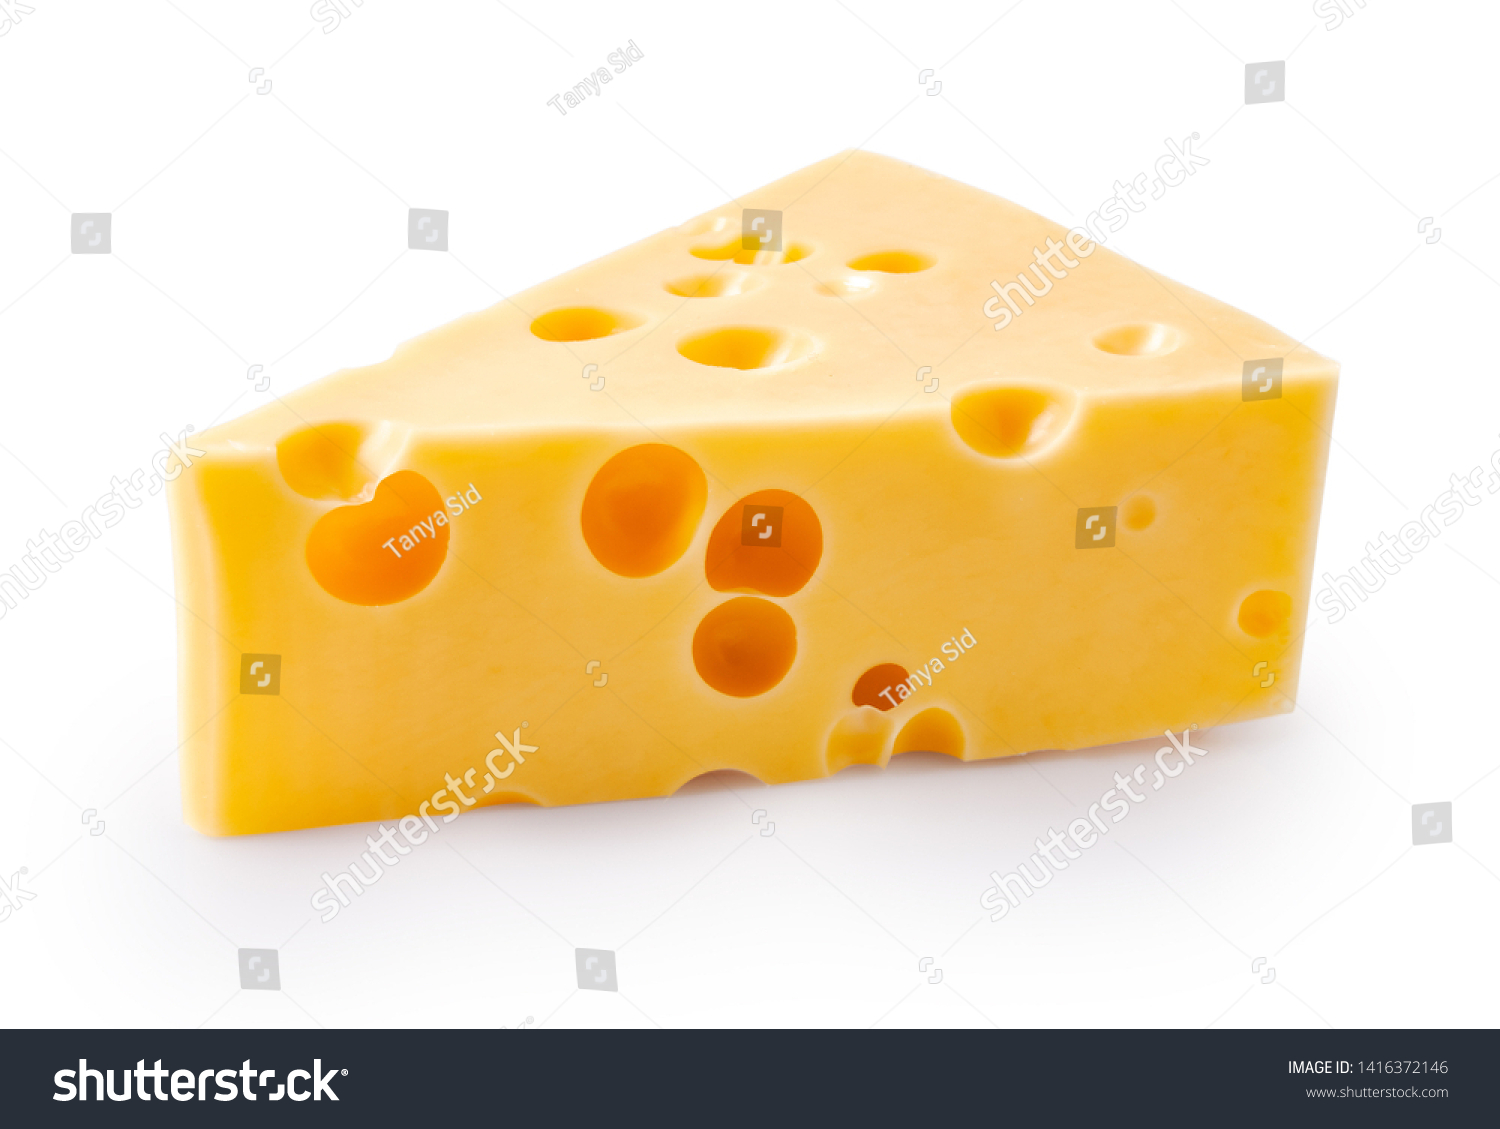 Piece of cheese isolated on white background. #1416372146